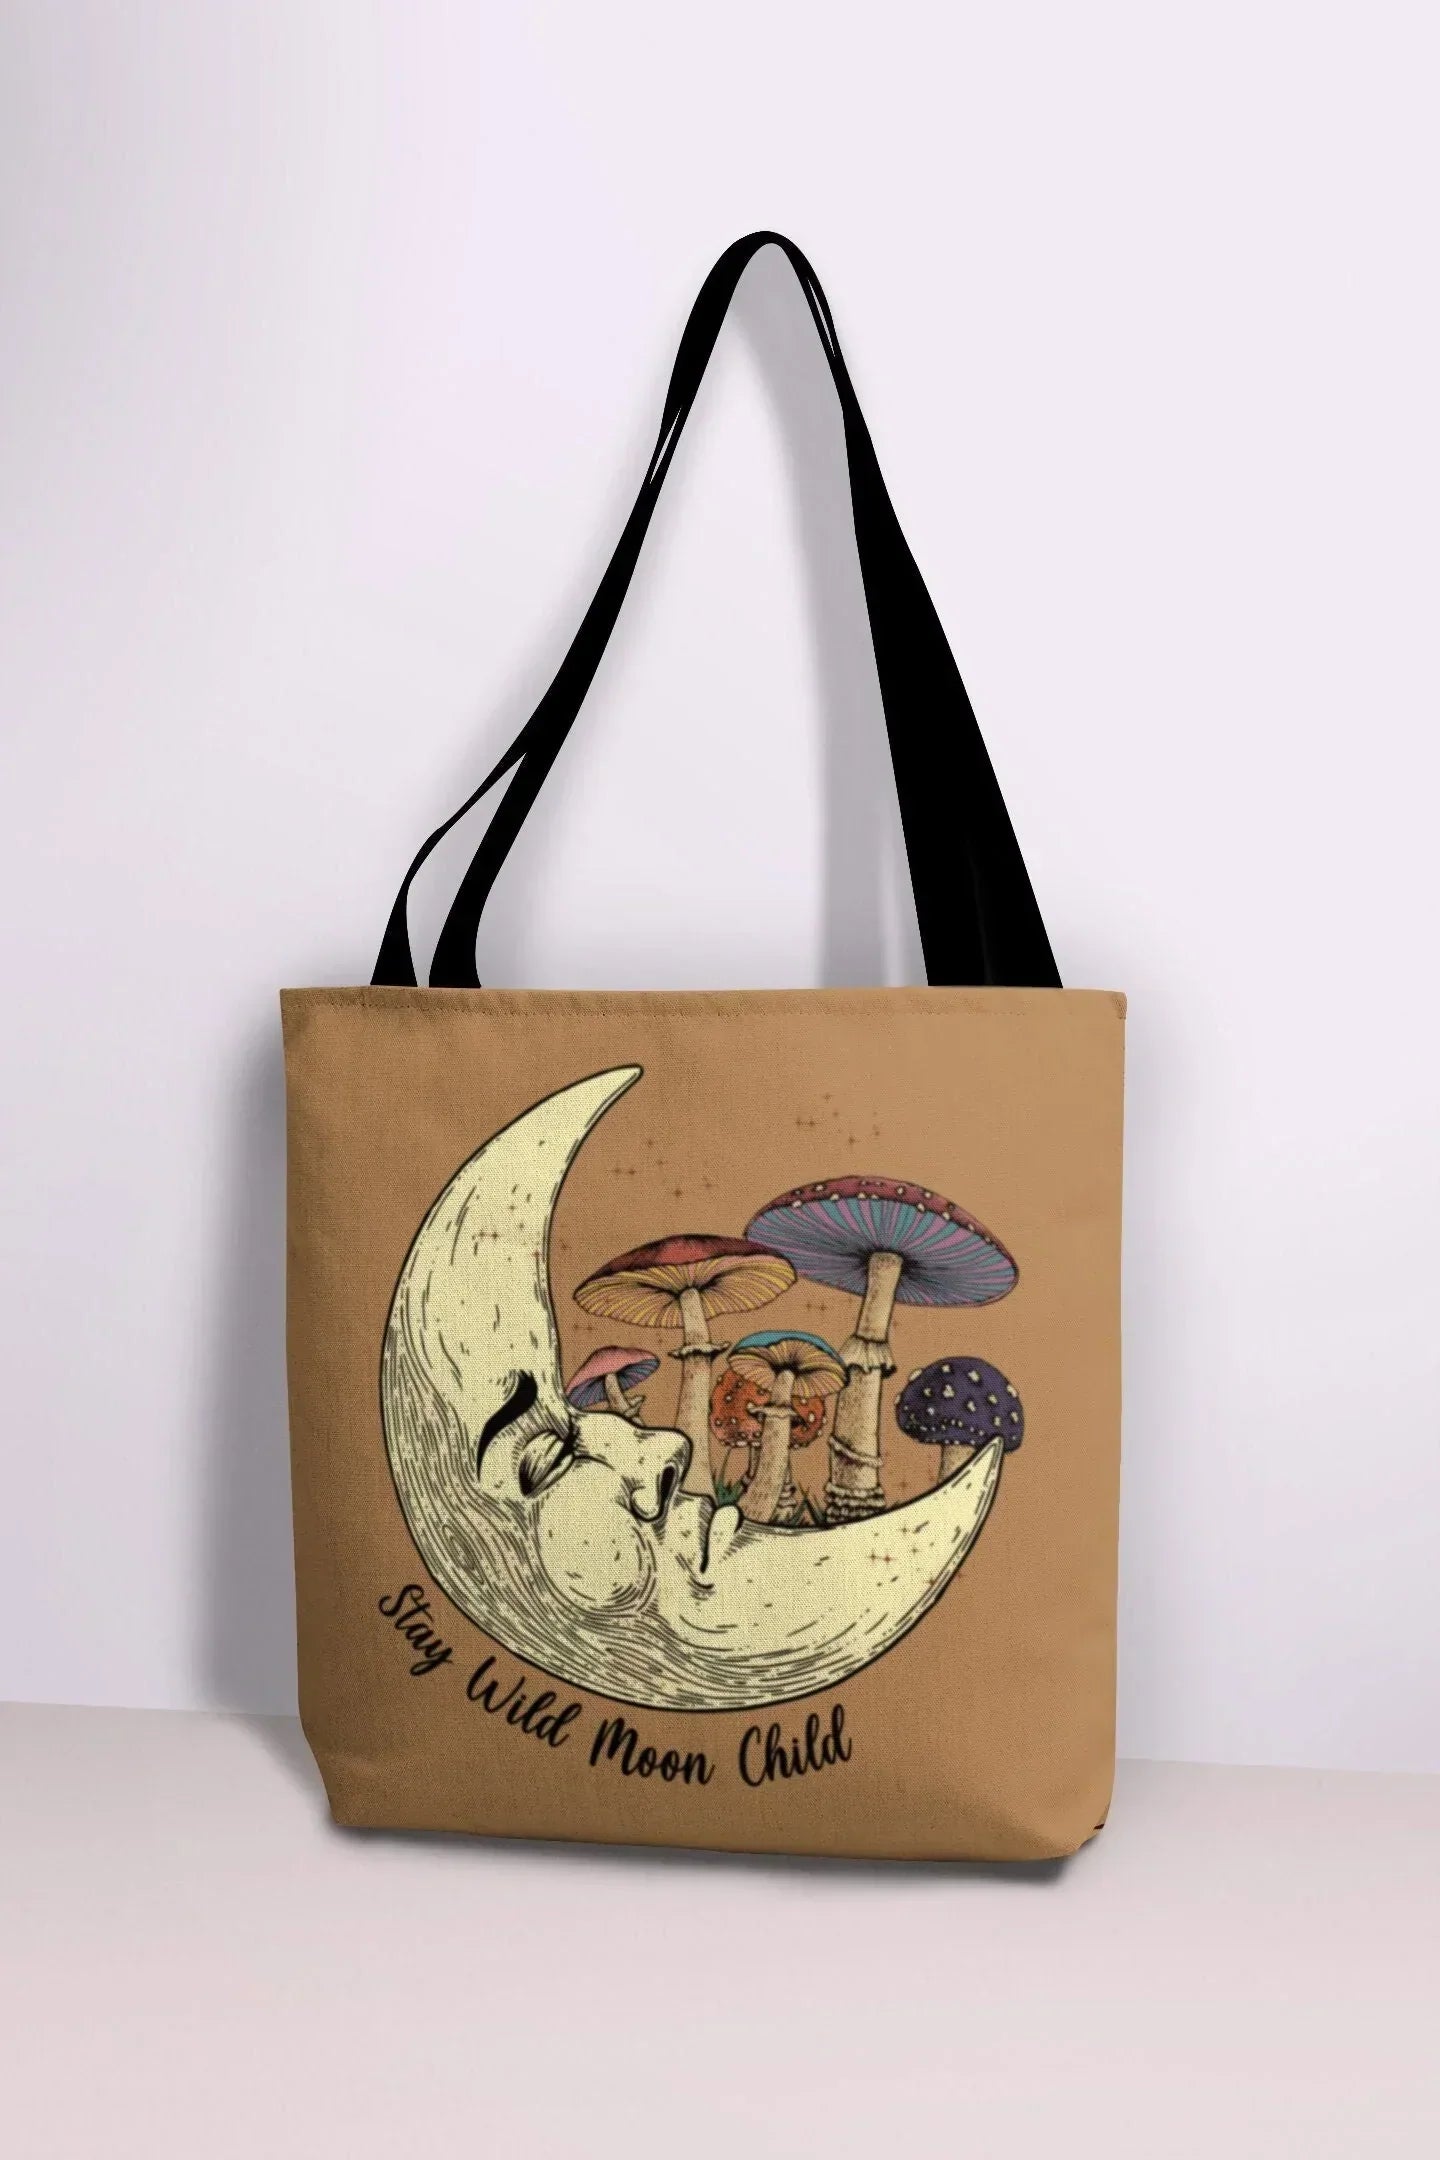 Stay Wild Moon Child, Mushroom Tote Bag, Mushroom Lovers Gifts, Reusable Canvas Bag, Hippie Psychedelic Gift